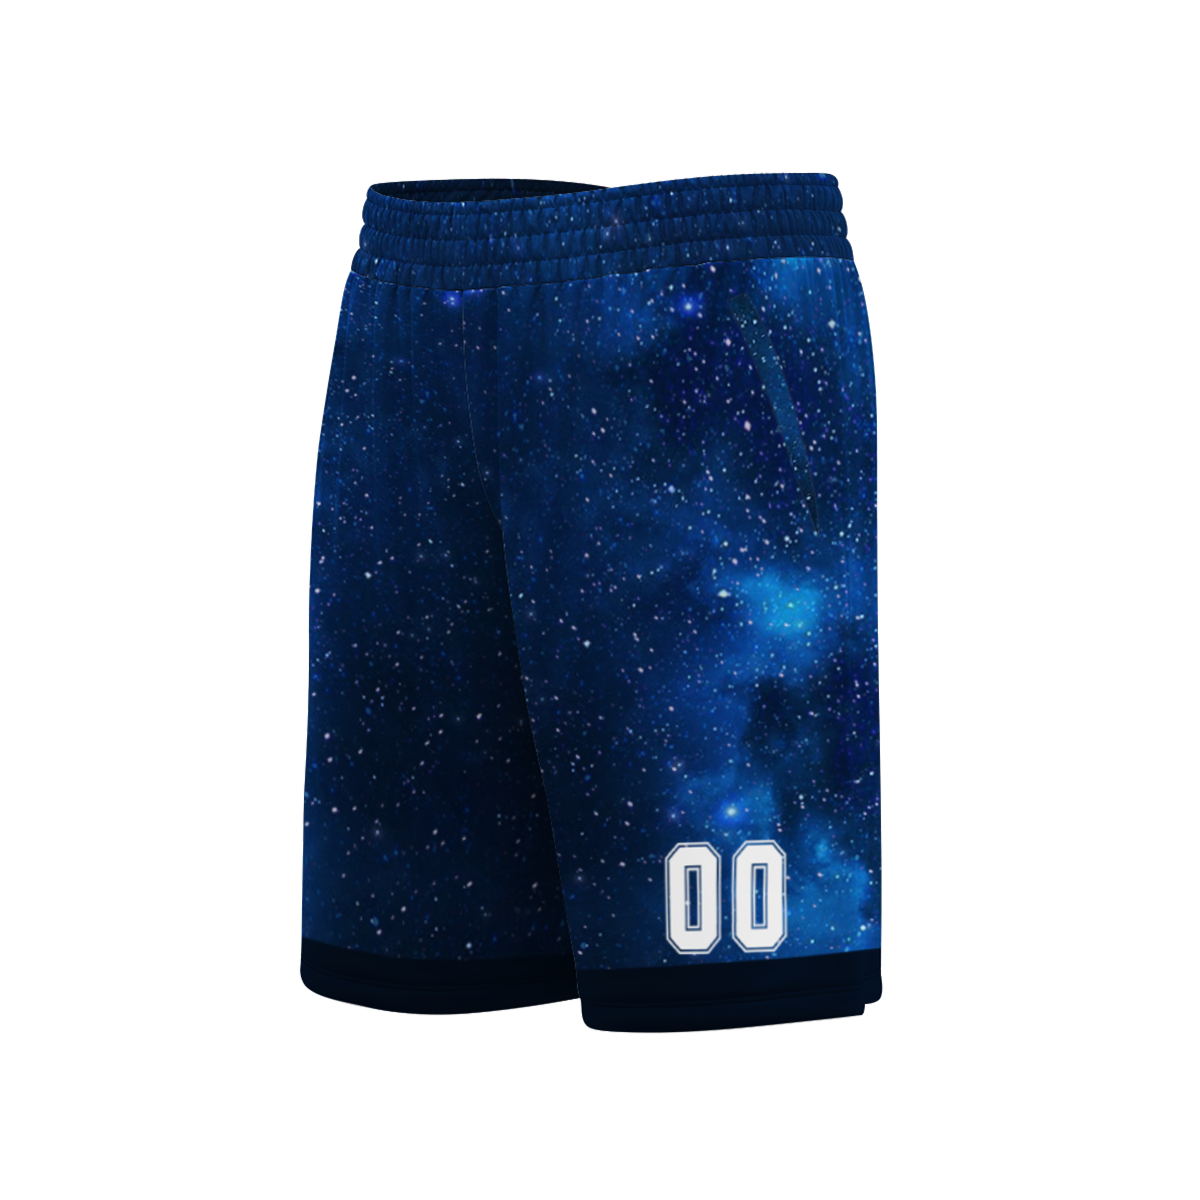 newest-sports-basketball-jersey-uniforms-design-sublimation-customize-print-on-demand-basketball-suits-at-cj-pod-8